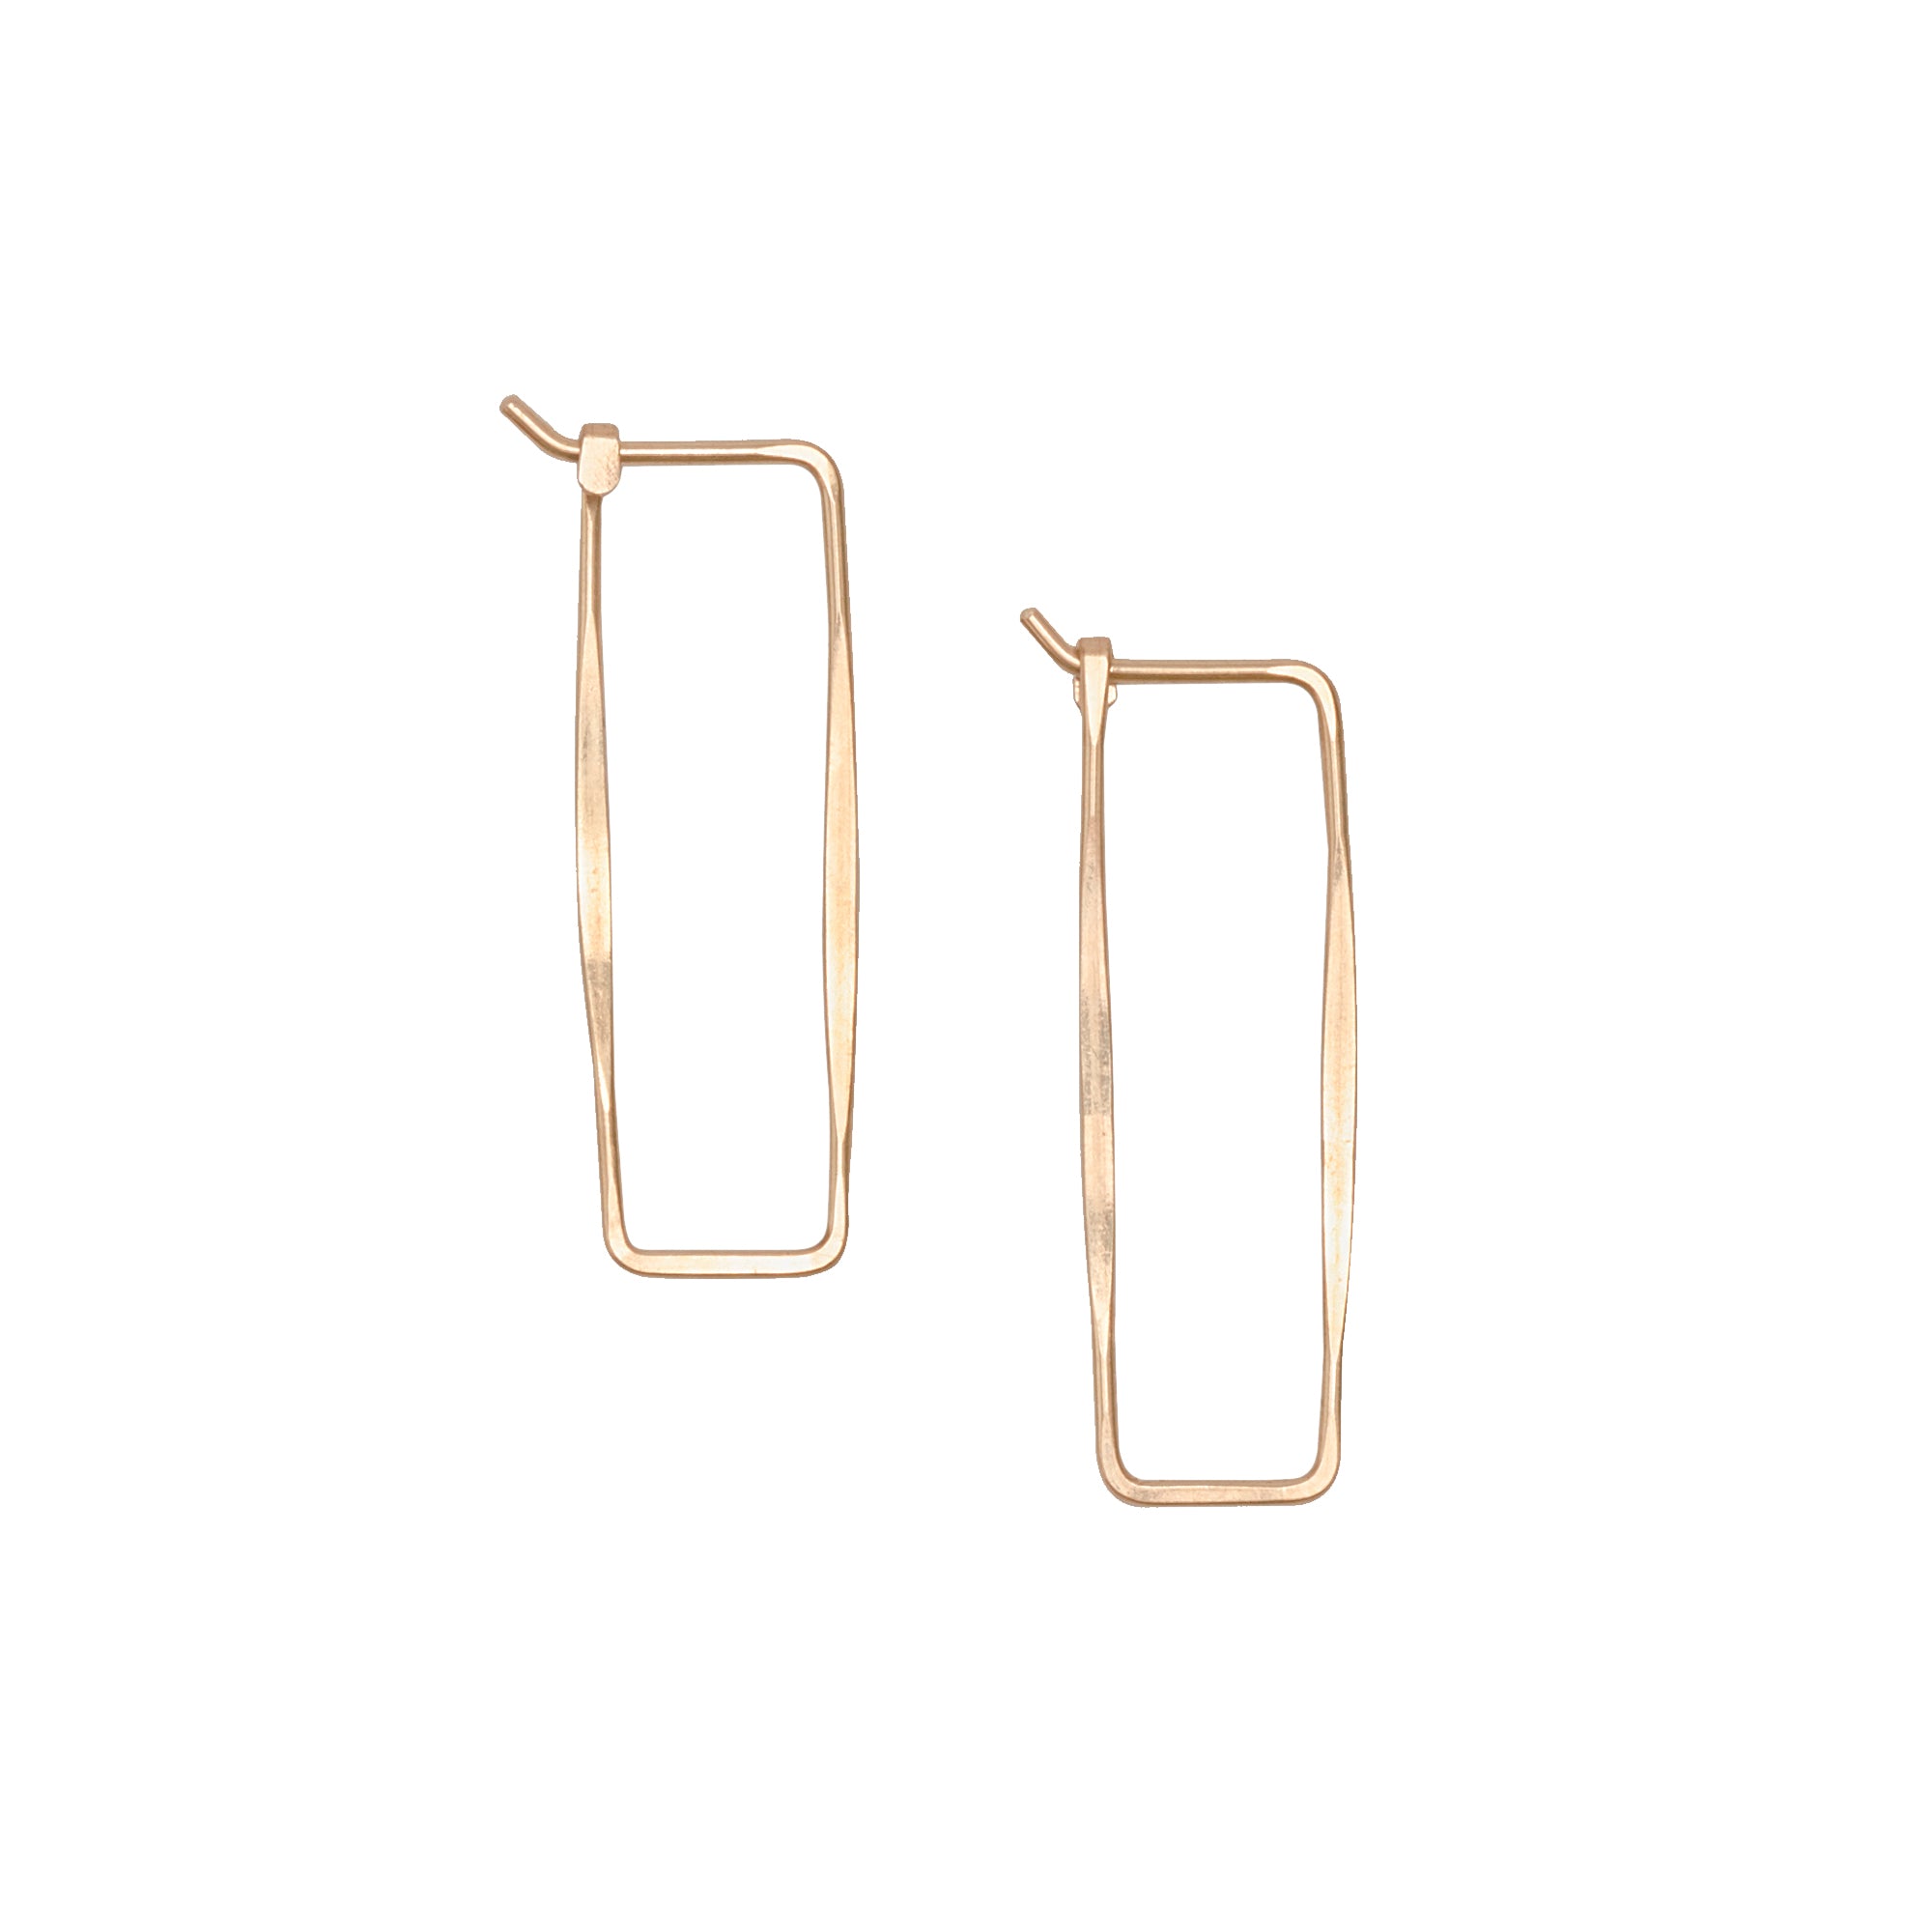 The Thin Rectangle Hoop in hand hammered 14k gold is a contemporary alternative to the traditional hoop.